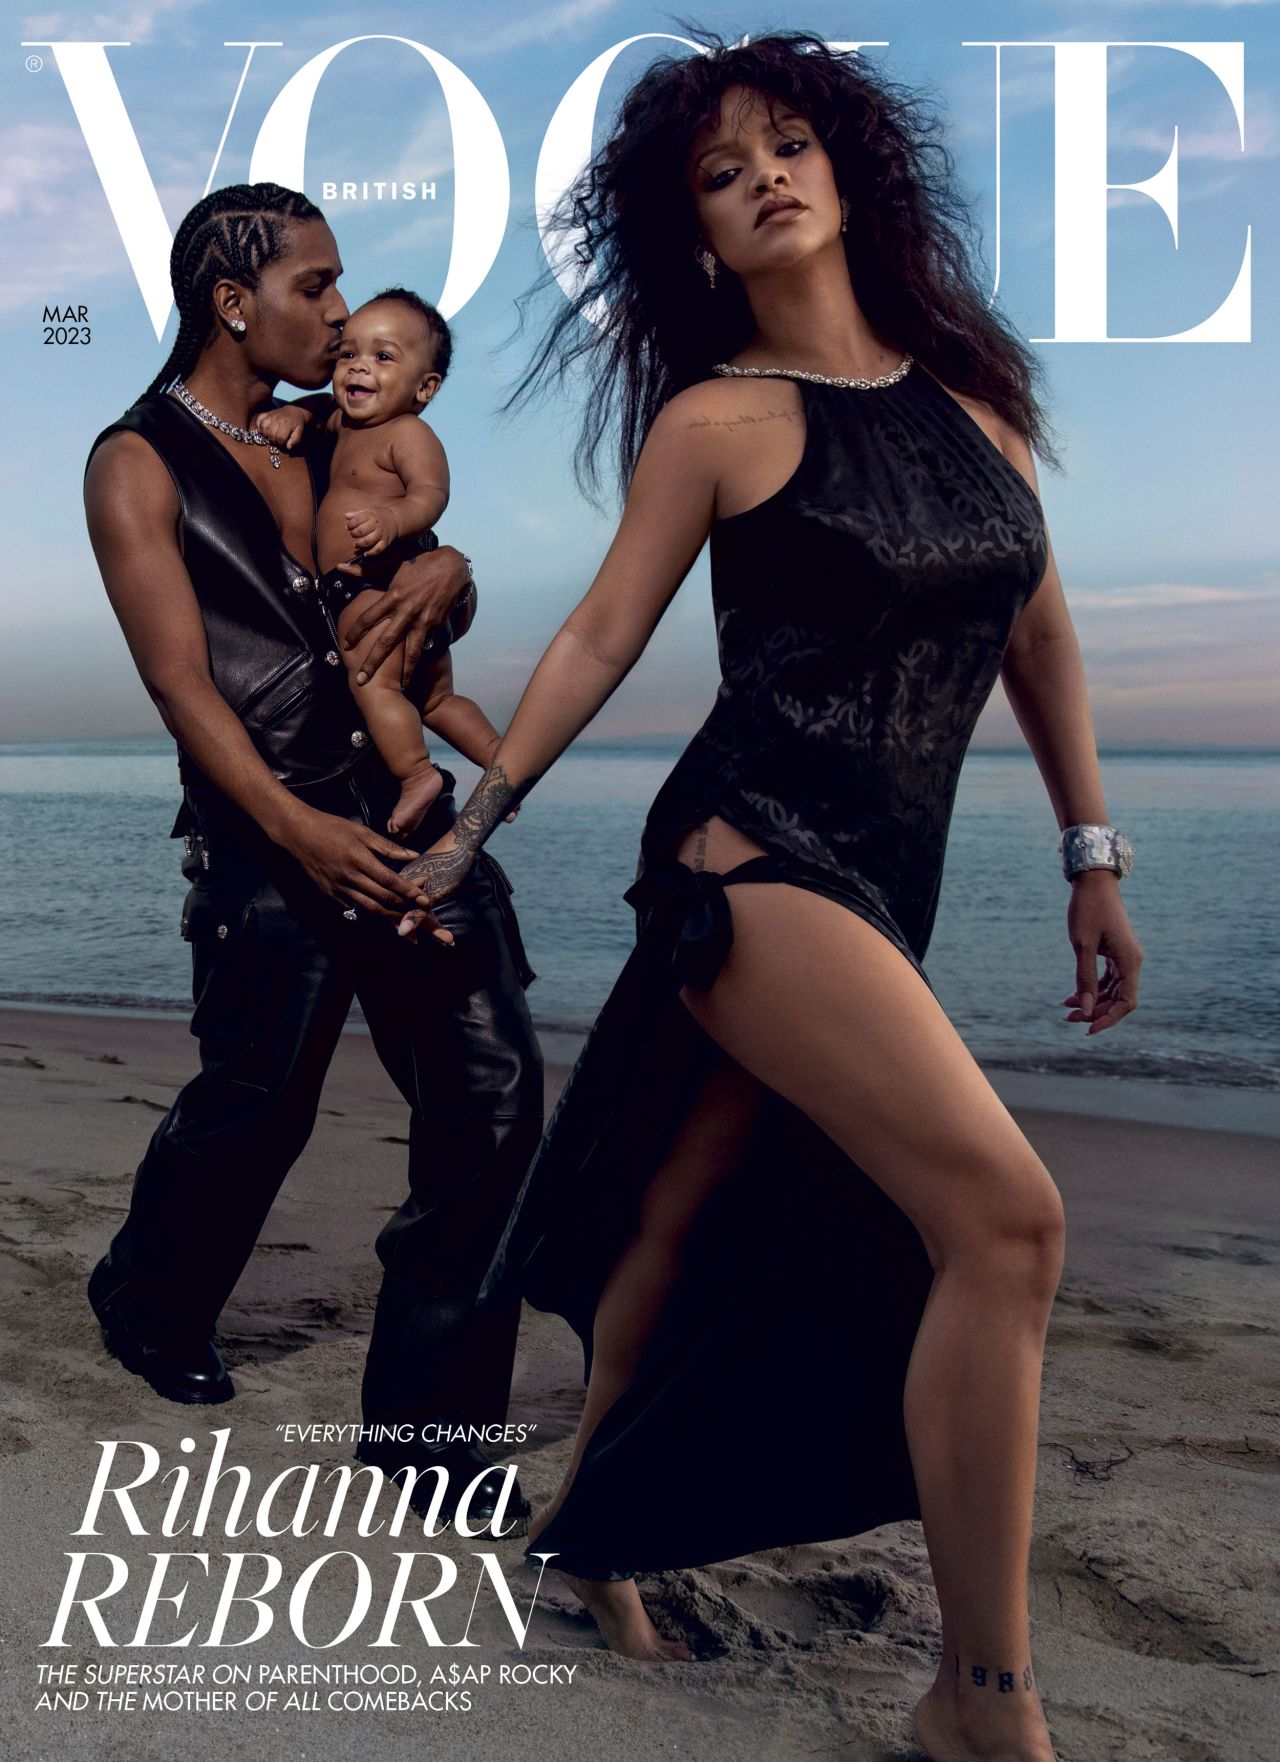 Recently, Rihanna made her latest British Vogue cover a family affair. On the cover of the March 2023 issue, the new mother strides powerfully across the beach with her partner A$AP Rocky and baby in tow, pregnant without knowing it. "How crazy both of my babies were in these photos and mommy had no clue," she wrote on Instagram. (The full feature is in the March issue of British Vogue available via digital download and on newsstands from February 21.)